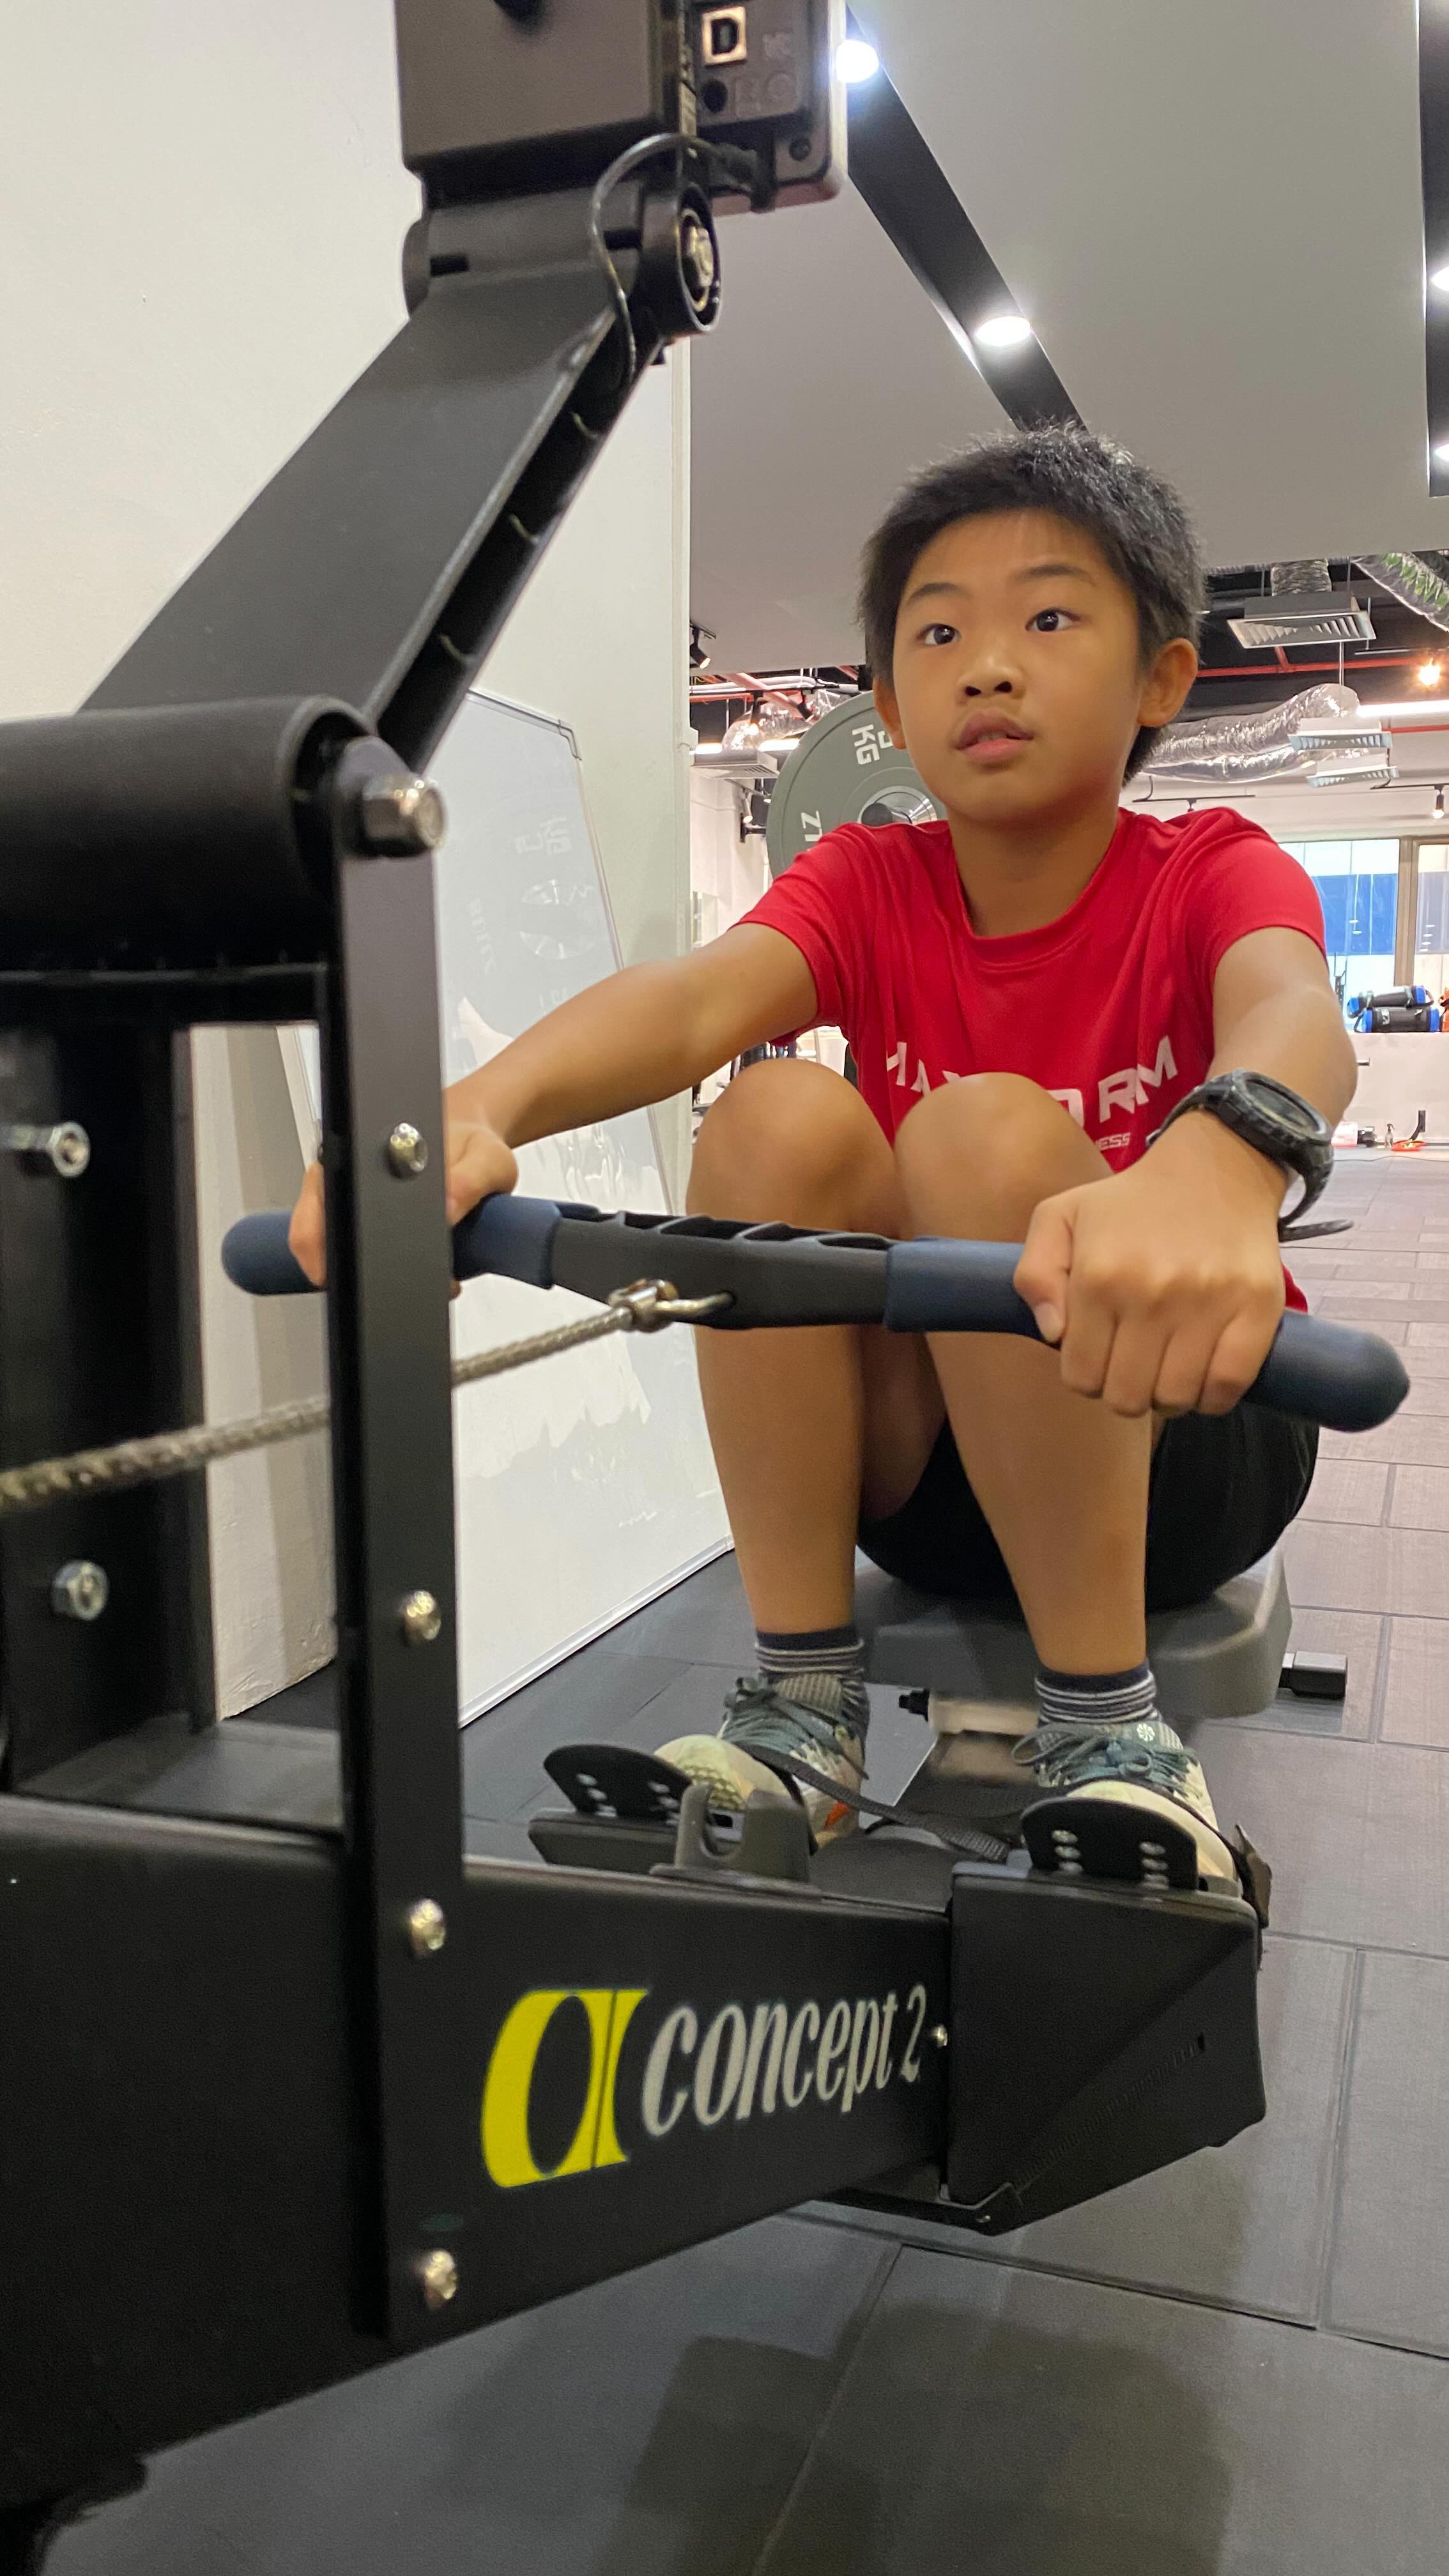 Push-Pull for strength day!

Learning life, discovery of oneself and building character through physical work! It is often overlooked and buried by other commitments such as academics in our modern society.

What a fun and meaningful session! Start them young!

▫️
▫️
#strength #strengthtraining #strengthandconditioning #performance #sportsperformance #performancetraining #coachsg #strengthcoach #strengthcoaching #netballsg #coachsg #strengthsg #performancesg #sportsg #sportssg #speedtraining #speedcoaching #plyometrics #speedskills #skillstraining